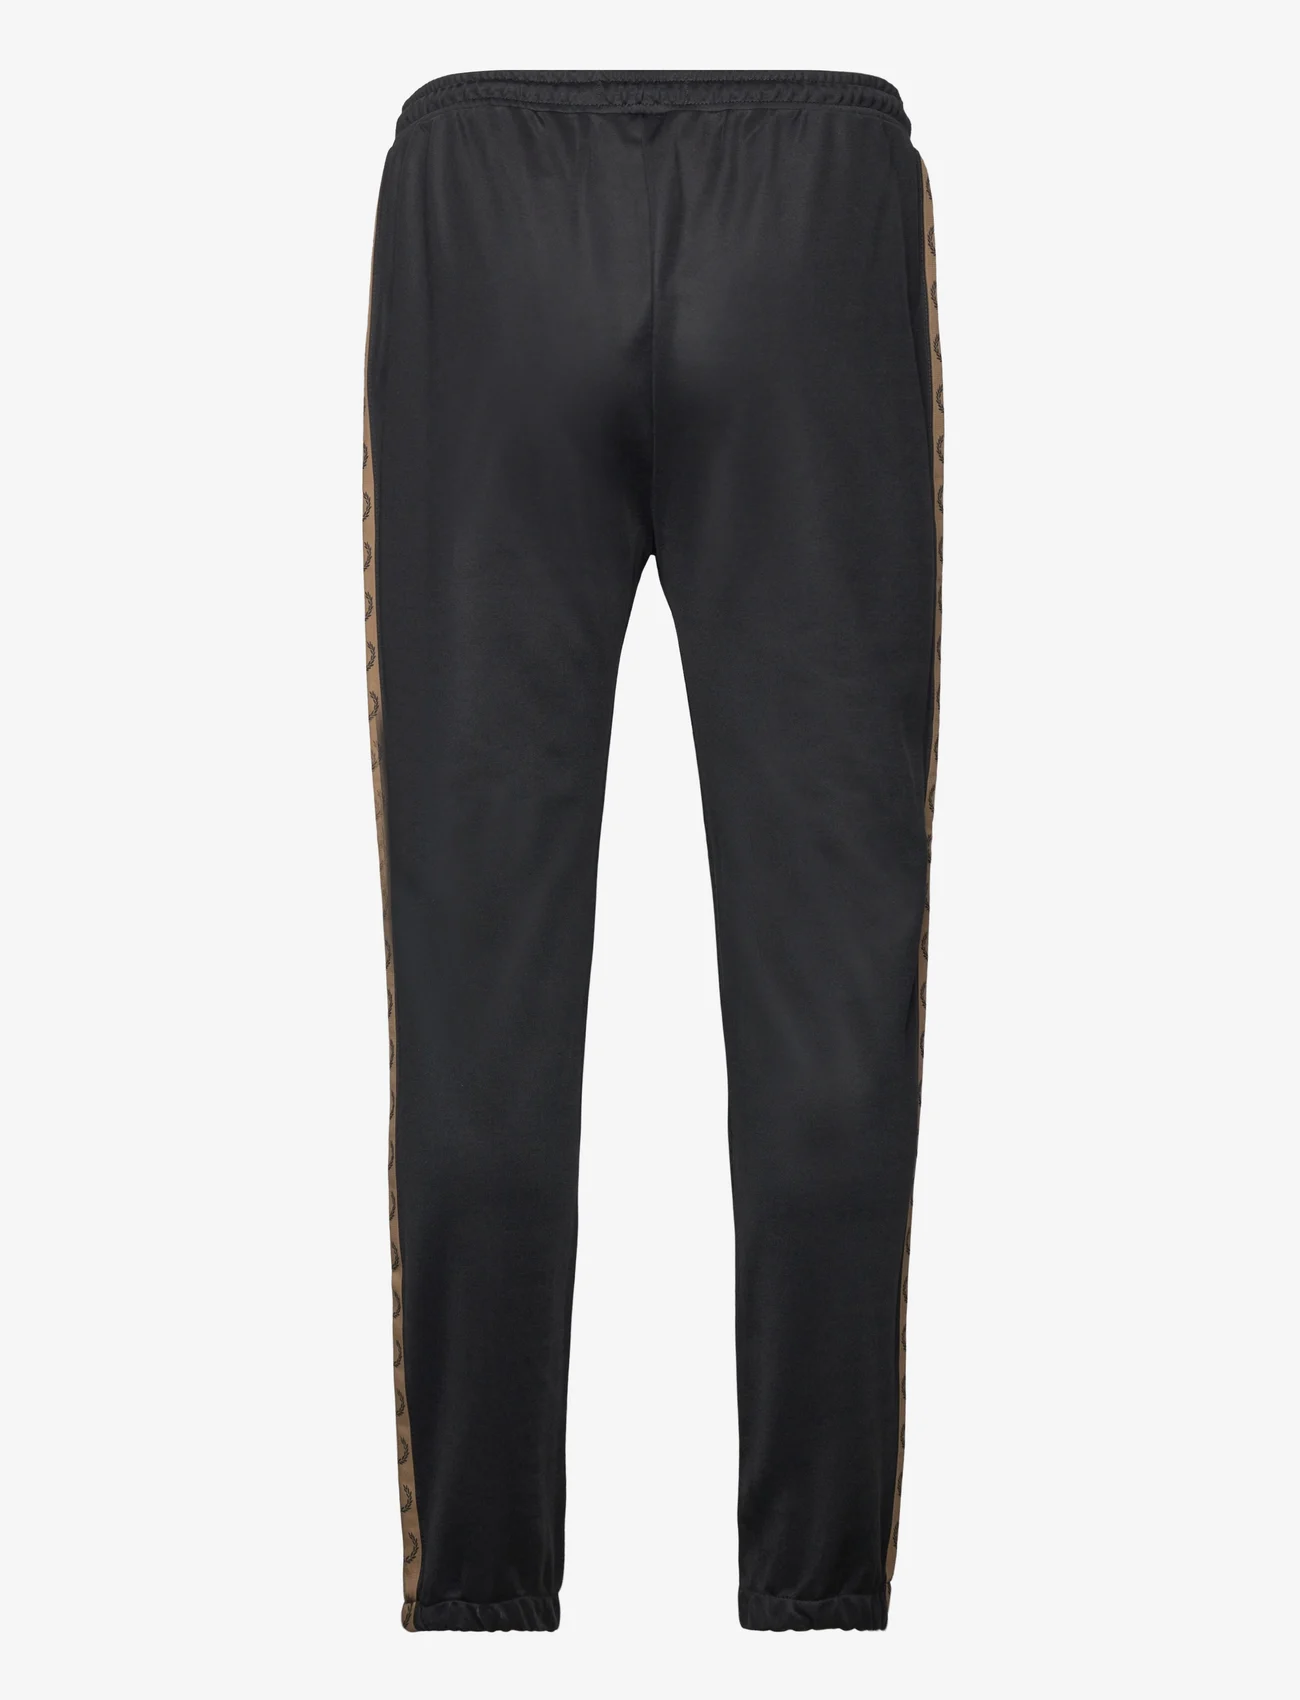 Fred Perry - CONTRAST TAPE TRACK PANT - sweatpants - black/shadedston - 1